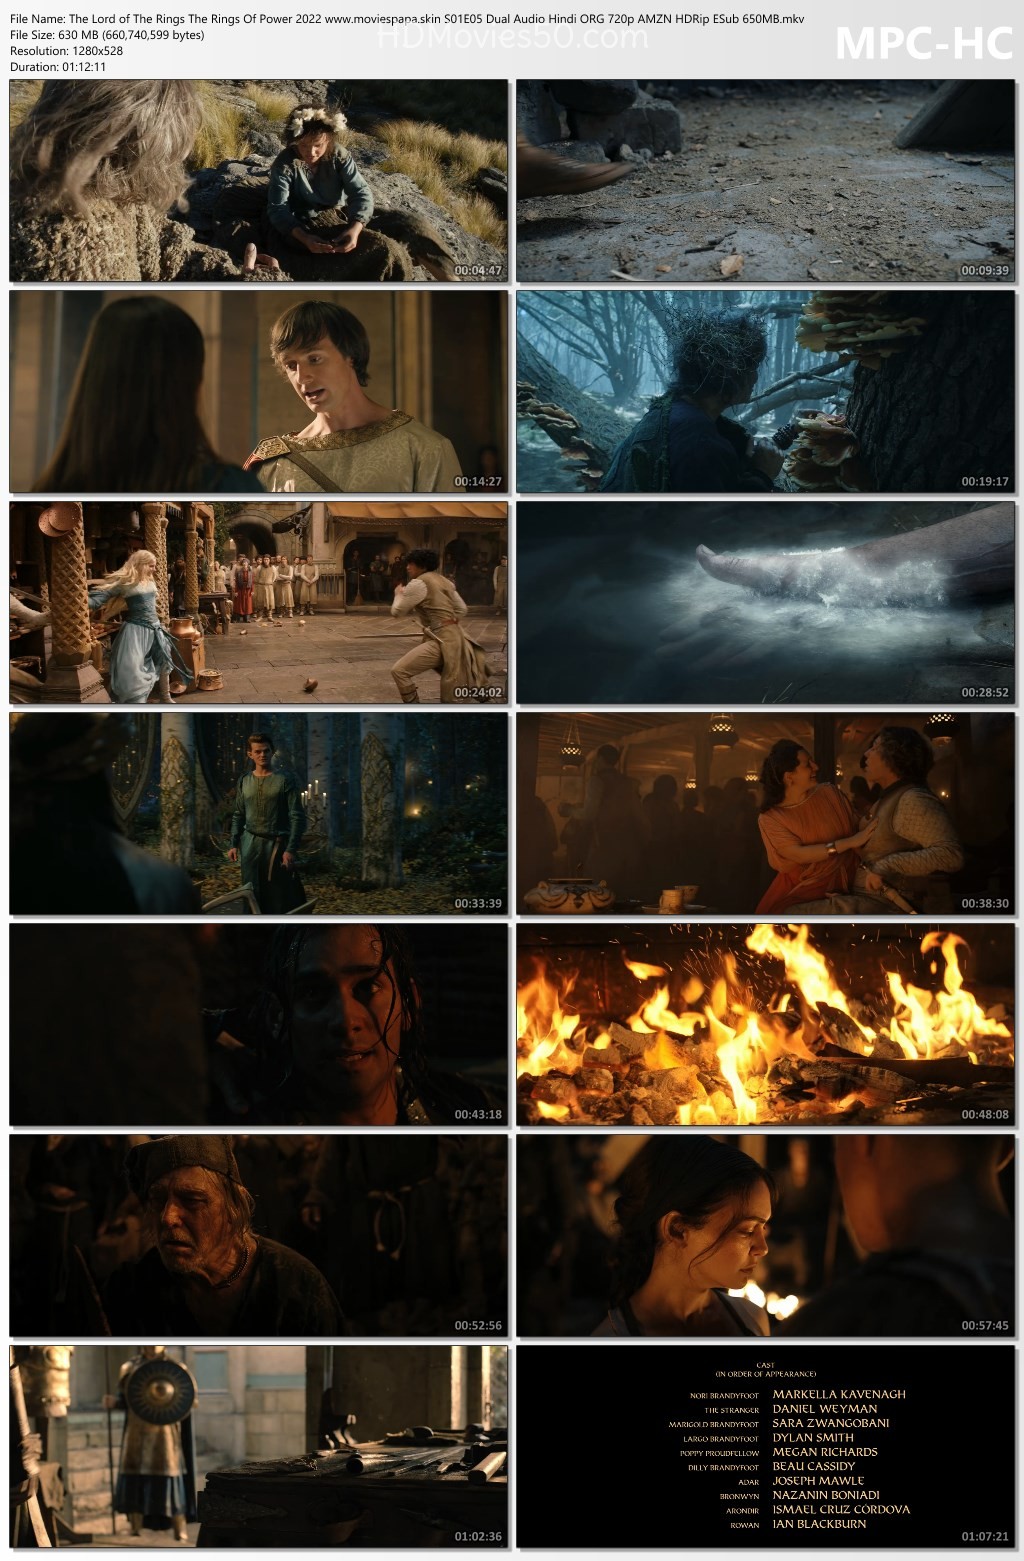 The Lord of the Rings 2022 screenshot HDMoviesFair